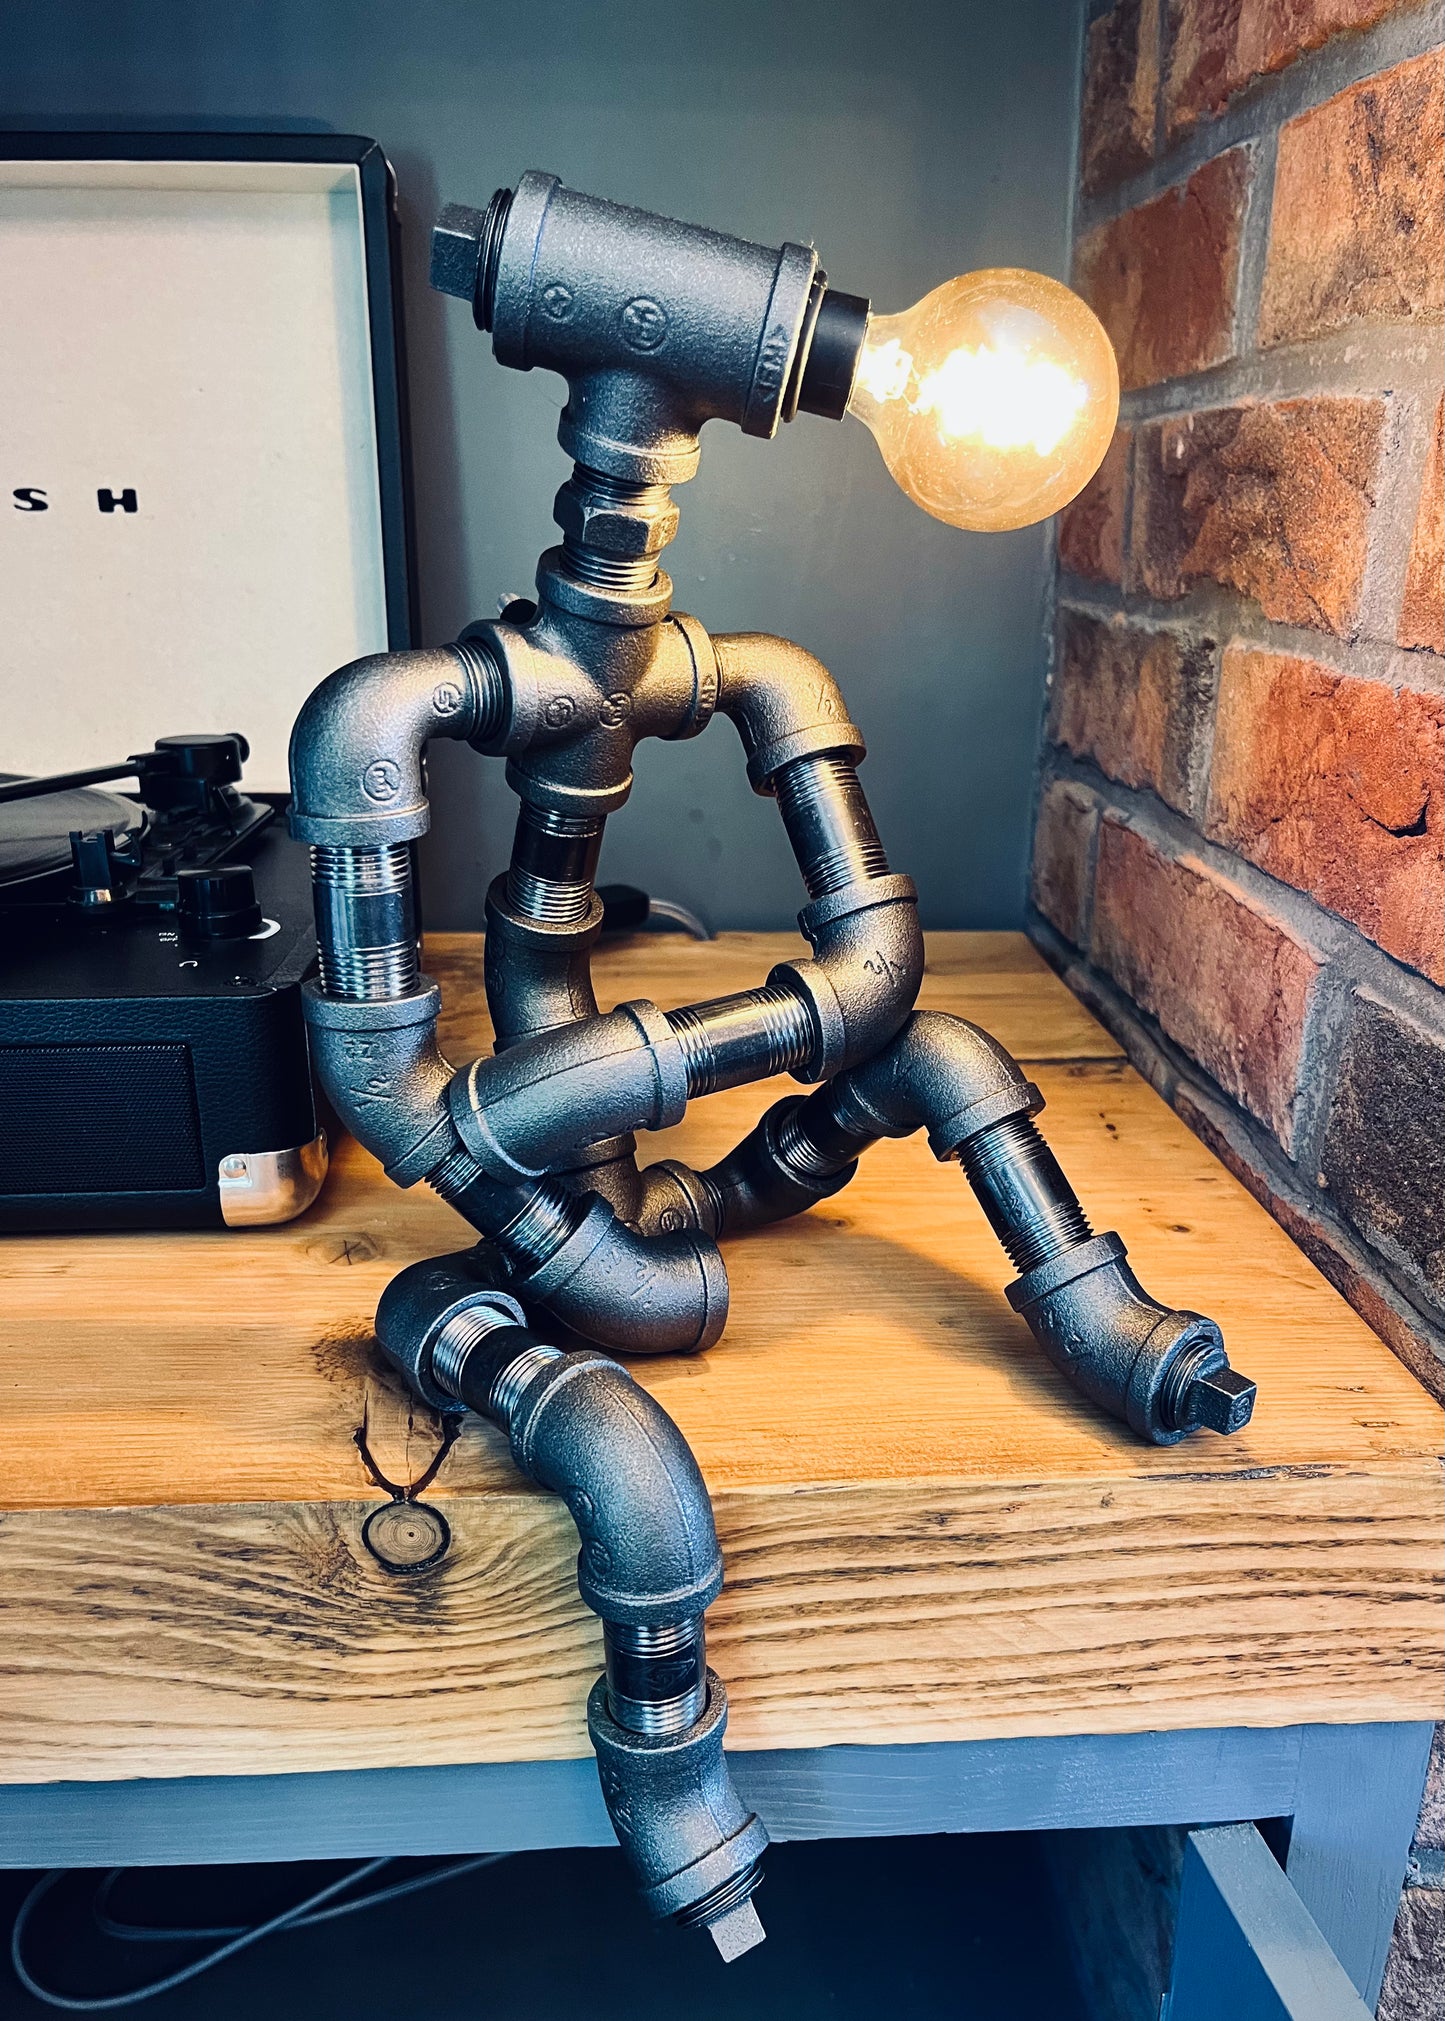 The Companion Industrial Iron Pipe Person Robot Lamp & Vintage Bulb